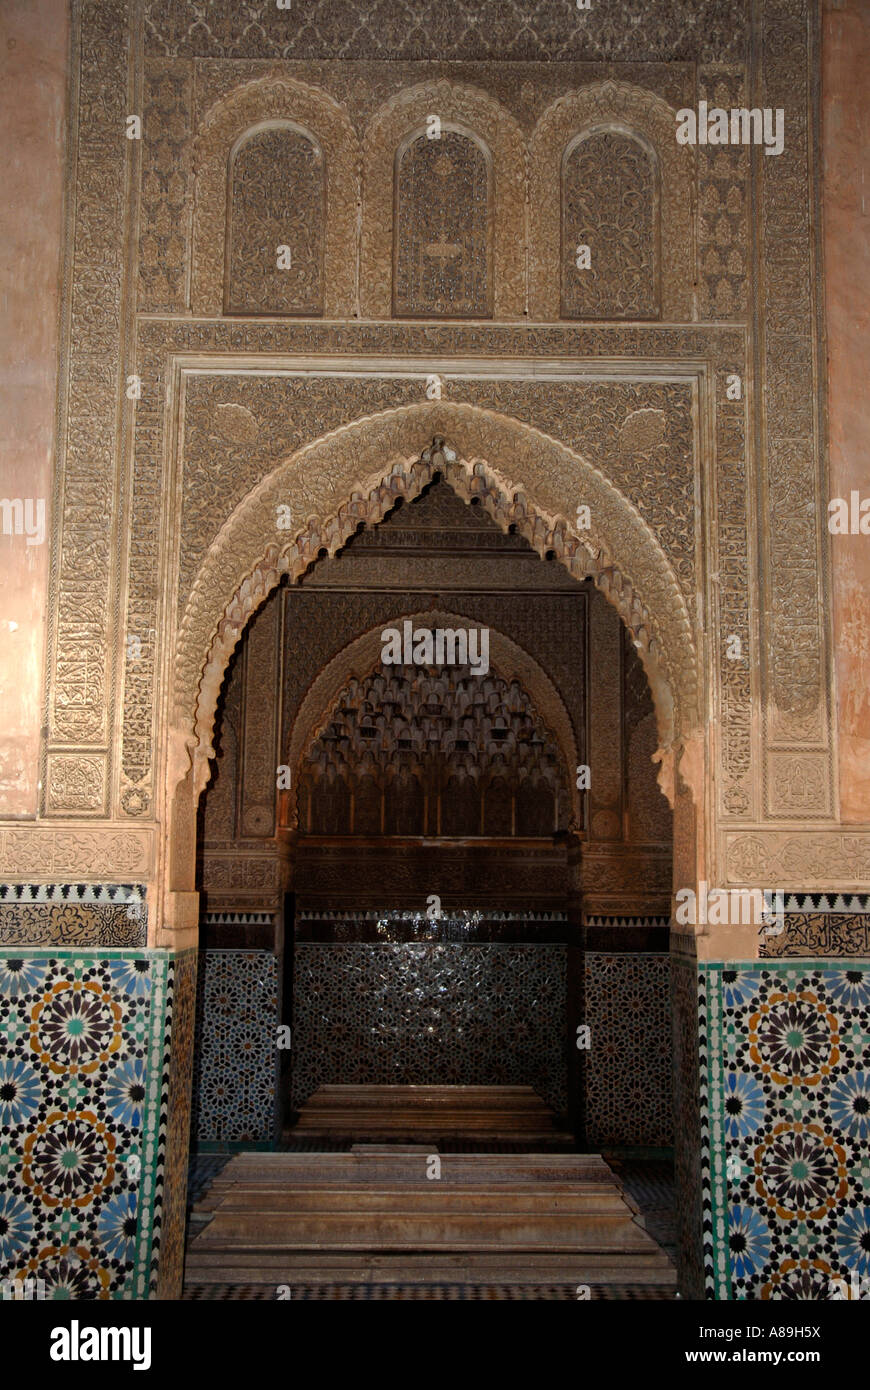 Oriental architecture interior decorated with stucco and glazed tiles Saadien tombs Marrakech Morocco Stock Photo